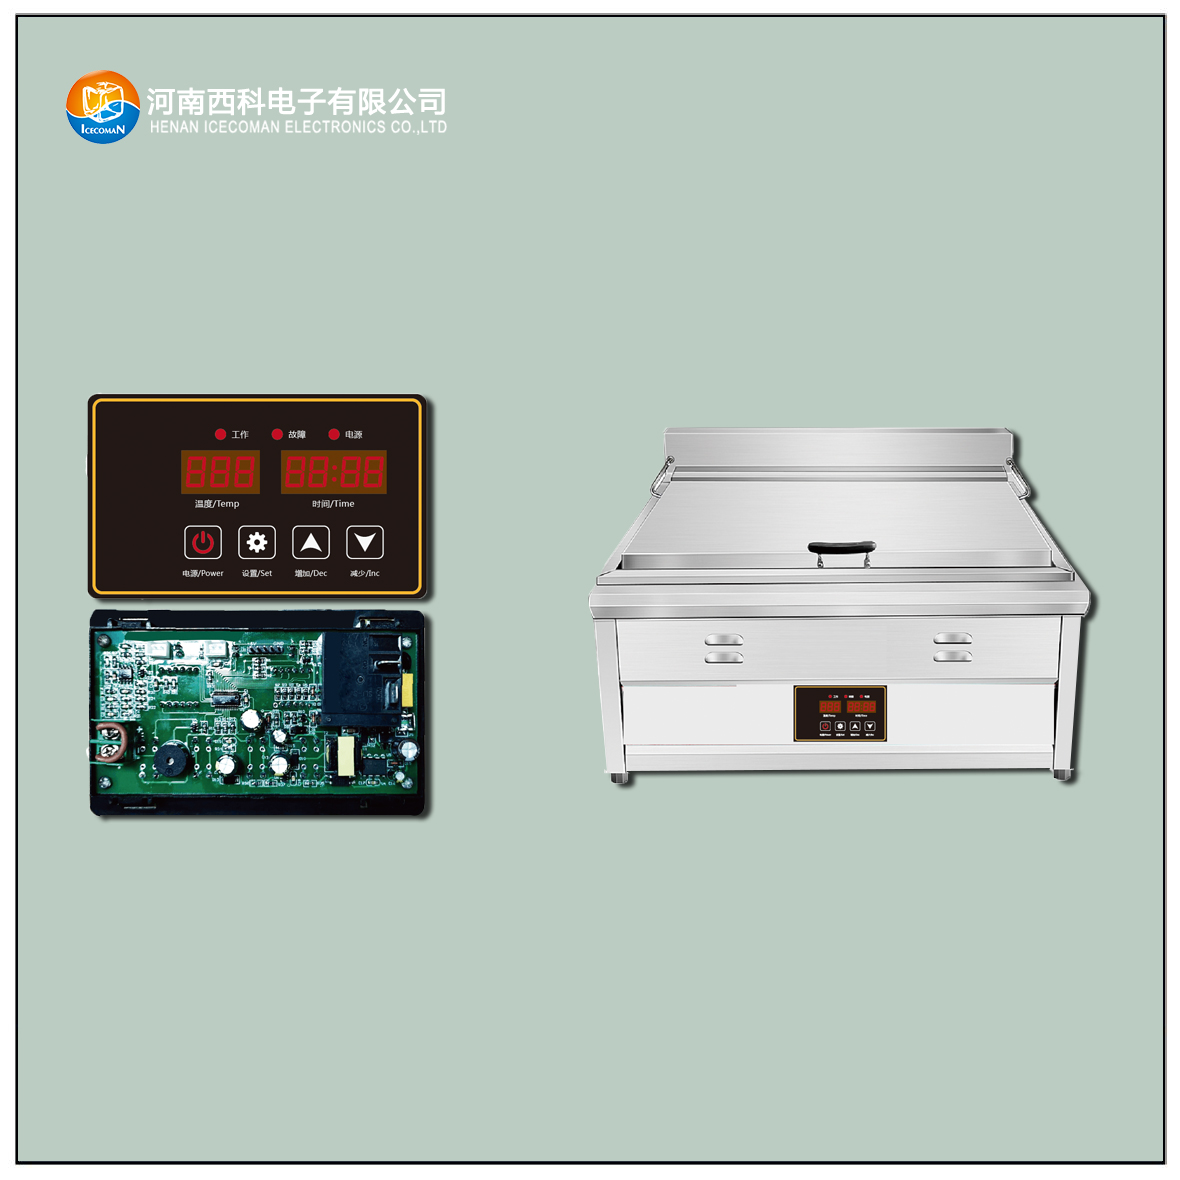 Wkq-smg-a multifunctional temperature controller